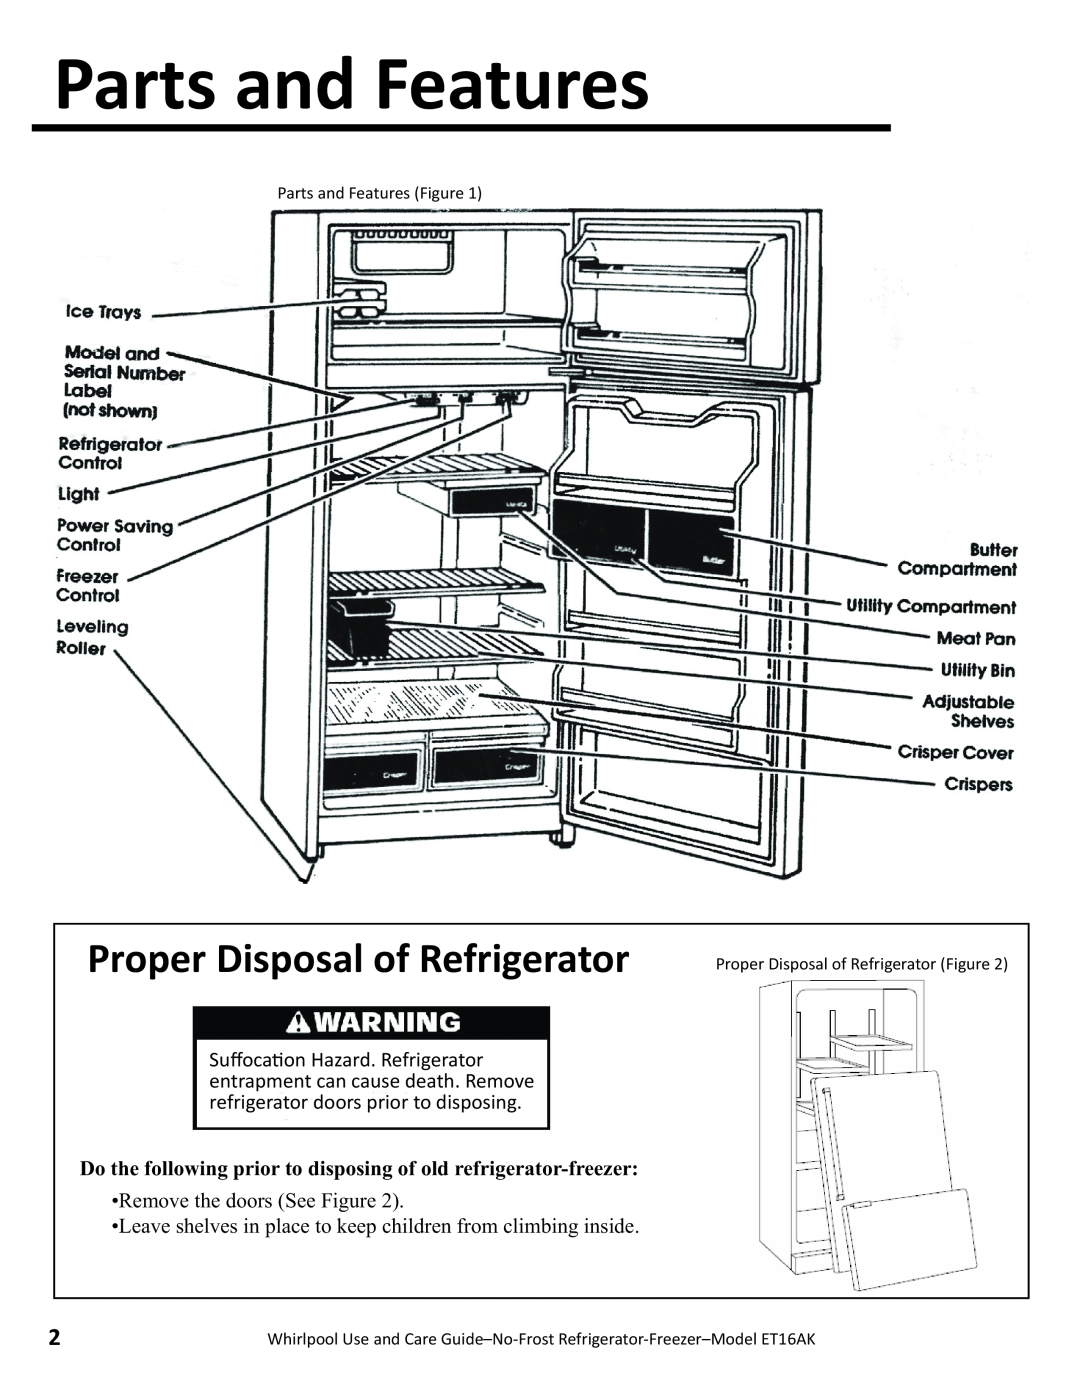 Whirlpool ET16AK manual Parts and Features Figure, Proper Disposal of Refrigerator Figure 